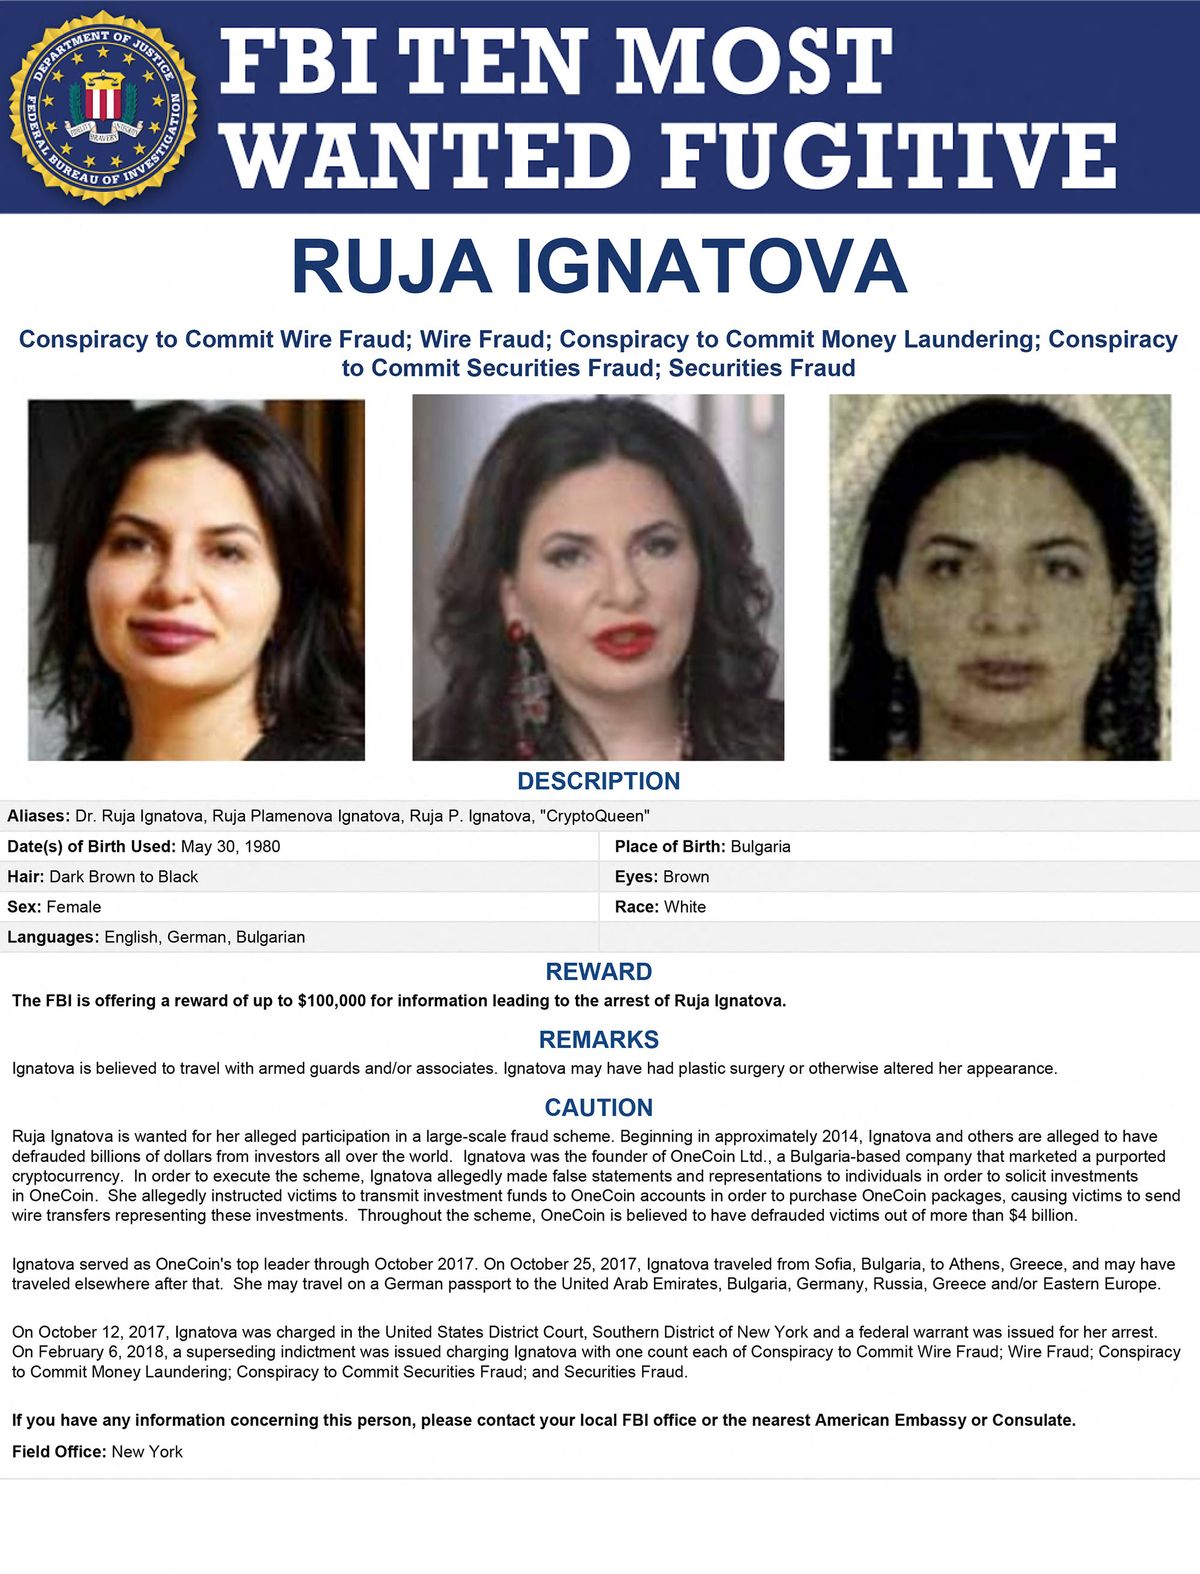 This image of a "Most Wanted" poster obtained from the FBI on June 30, 2022, shows Ruja Ignatova. - Ignatova, dubbed the "Crypto Queen." after she raised billions of dollars in a fraudulent virtual currency scheme was placed on the FBI's 10 most wanted fugitives list June 30, 2022. The Federal Bureau of Investigation put up a $100,000 reward for Ignatova, who disappeared in Greece in October 2017 around the time US authorities filed a sealed indictment and warrant for her arrest. The 42-year-old German citizen was behind one of the most notorious scams in the frequently treacherous world of crypto currencies. (Photo by Handout / FBI / AFP) / RESTRICTED TO EDITORIAL USE - MANDATORY CREDIT "AFP PHOTO / FBI" - NO MARKETING NO ADVERTISING CAMPAIGNS - DISTRIBUTED AS A SERVICE TO CLIENTS